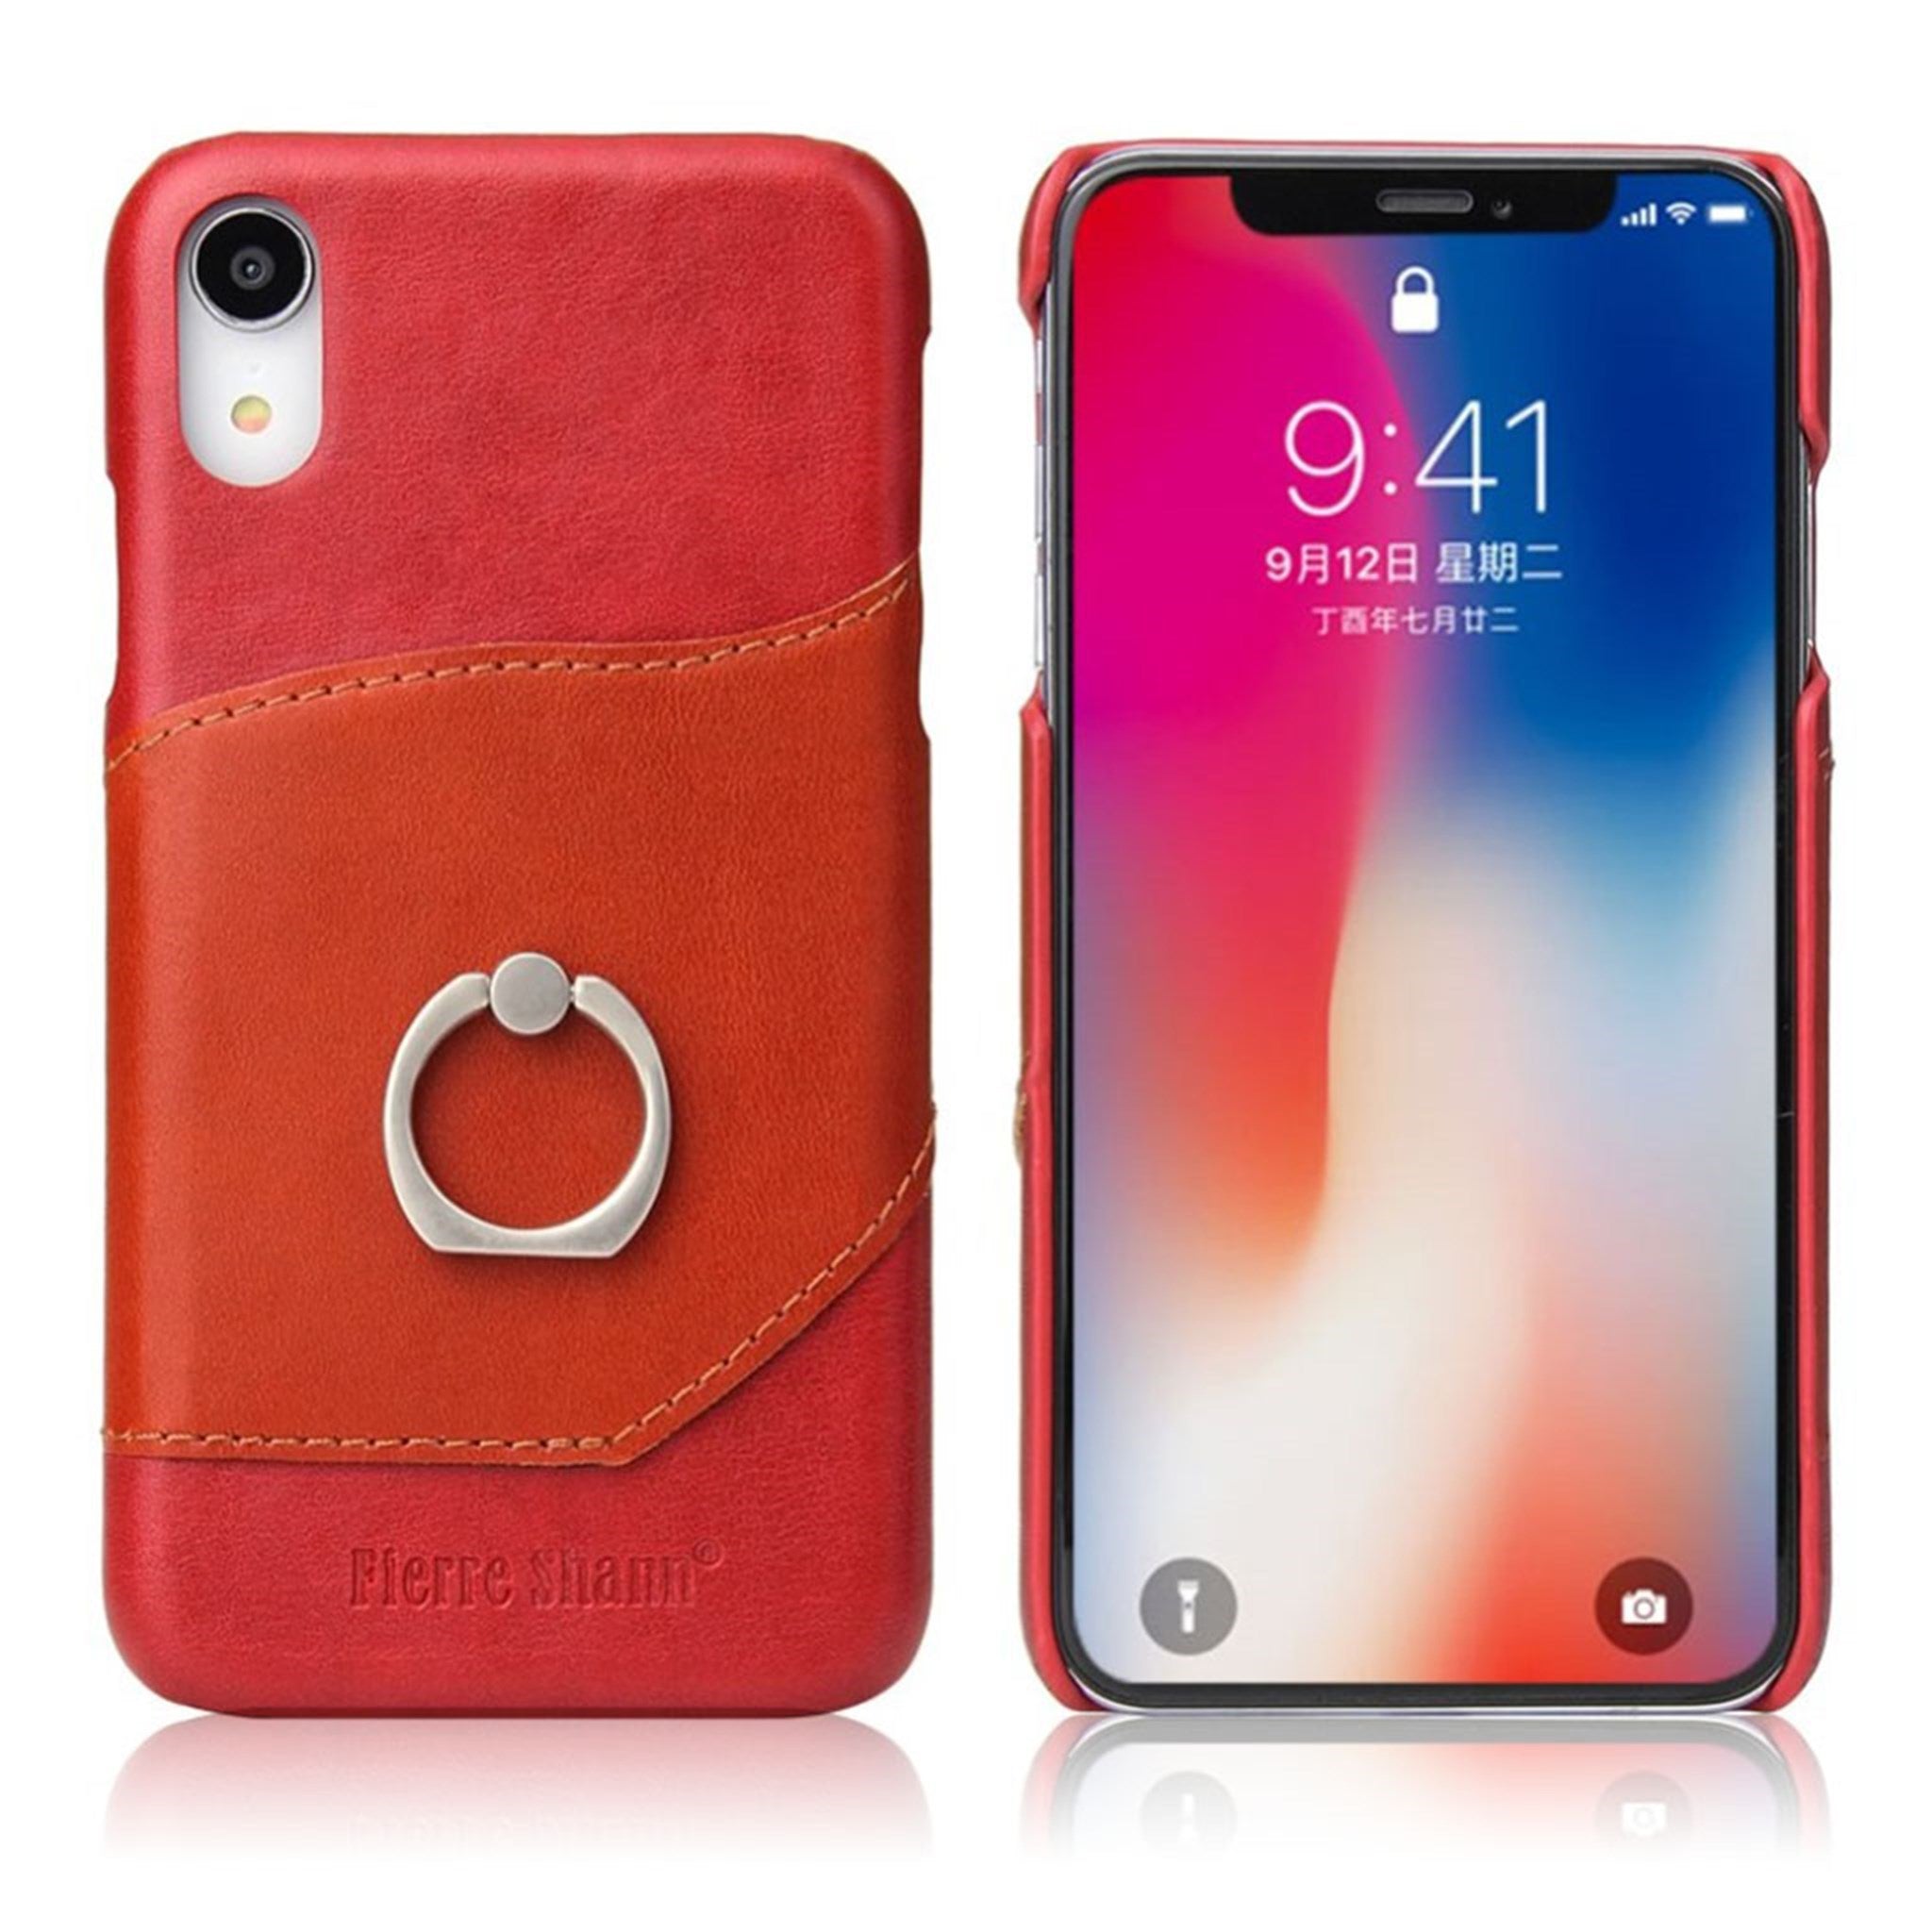 FIERRE SHANN iPhone Xr crazy horse cowhide leather case - Red